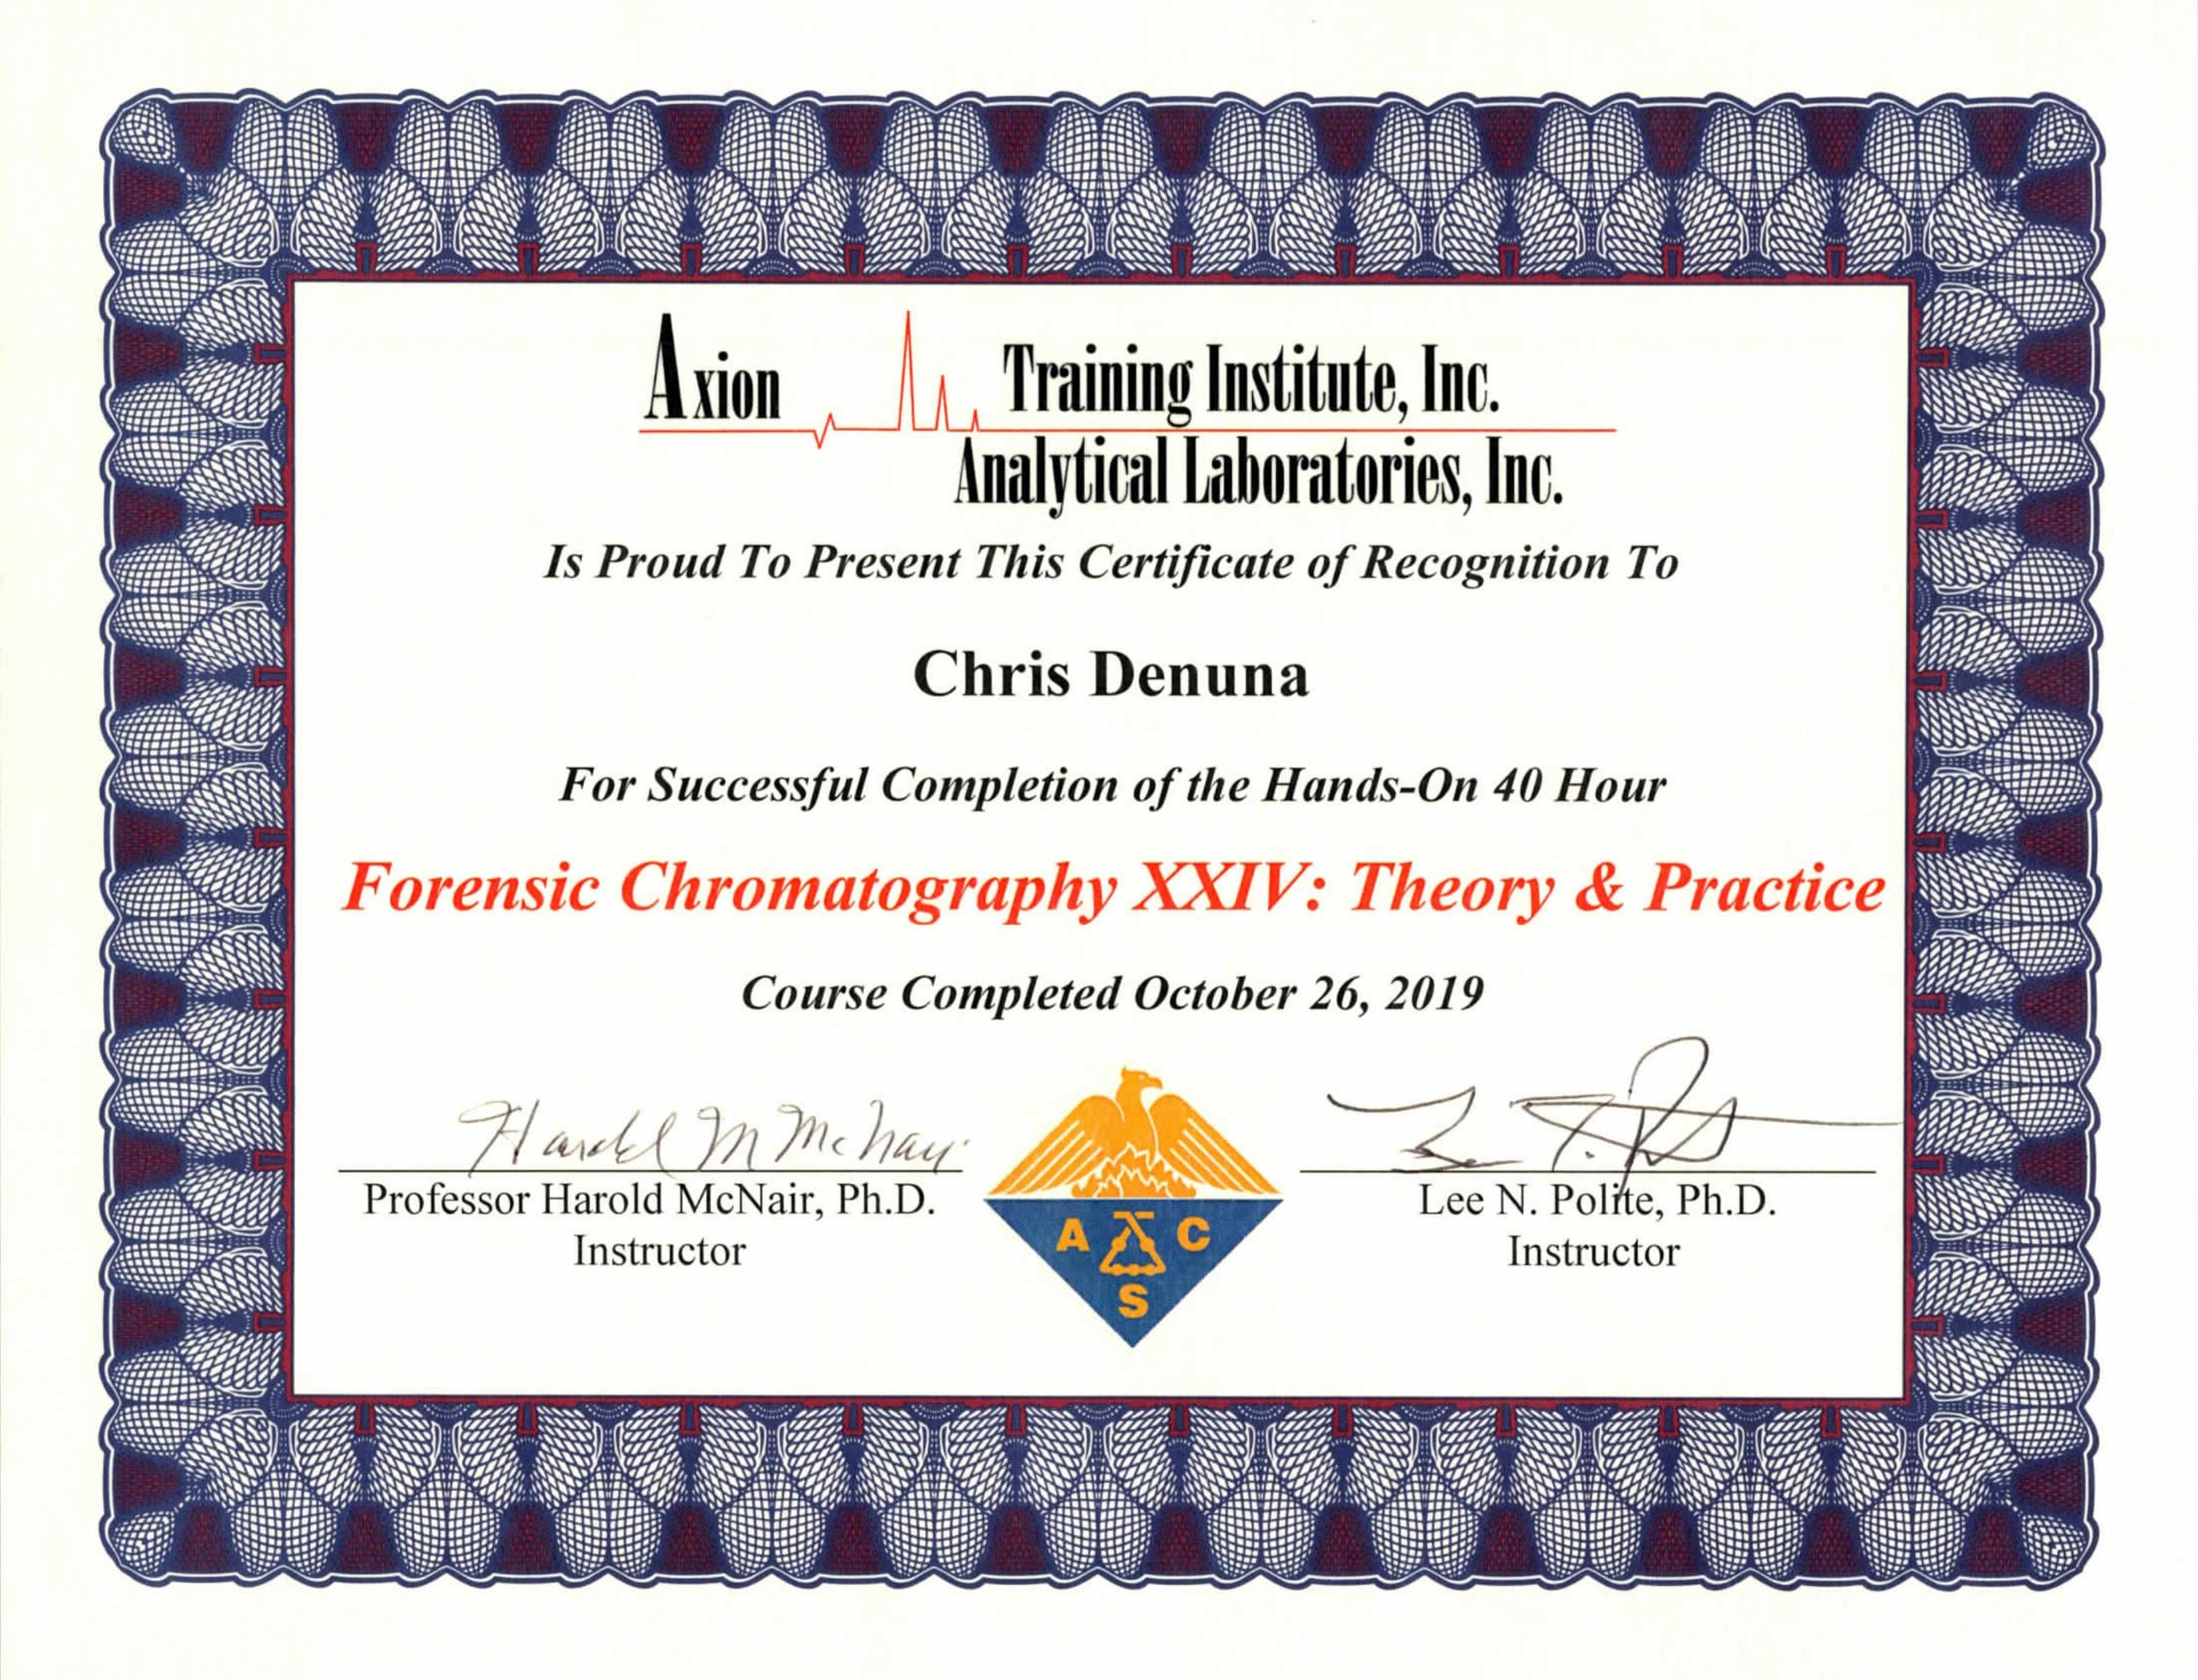 Axion Forensic Chromatography 2019 Certificate.jpg